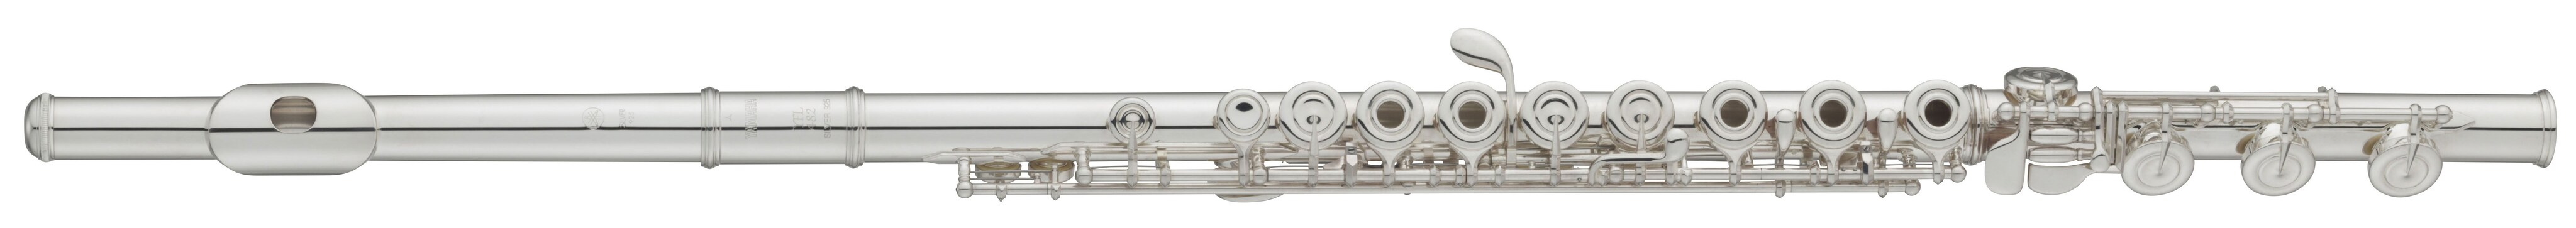 400/300/200 Series - Overview - Flutes - Brass u0026 Woodwinds - Musical  Instruments - Products - Yamaha USA